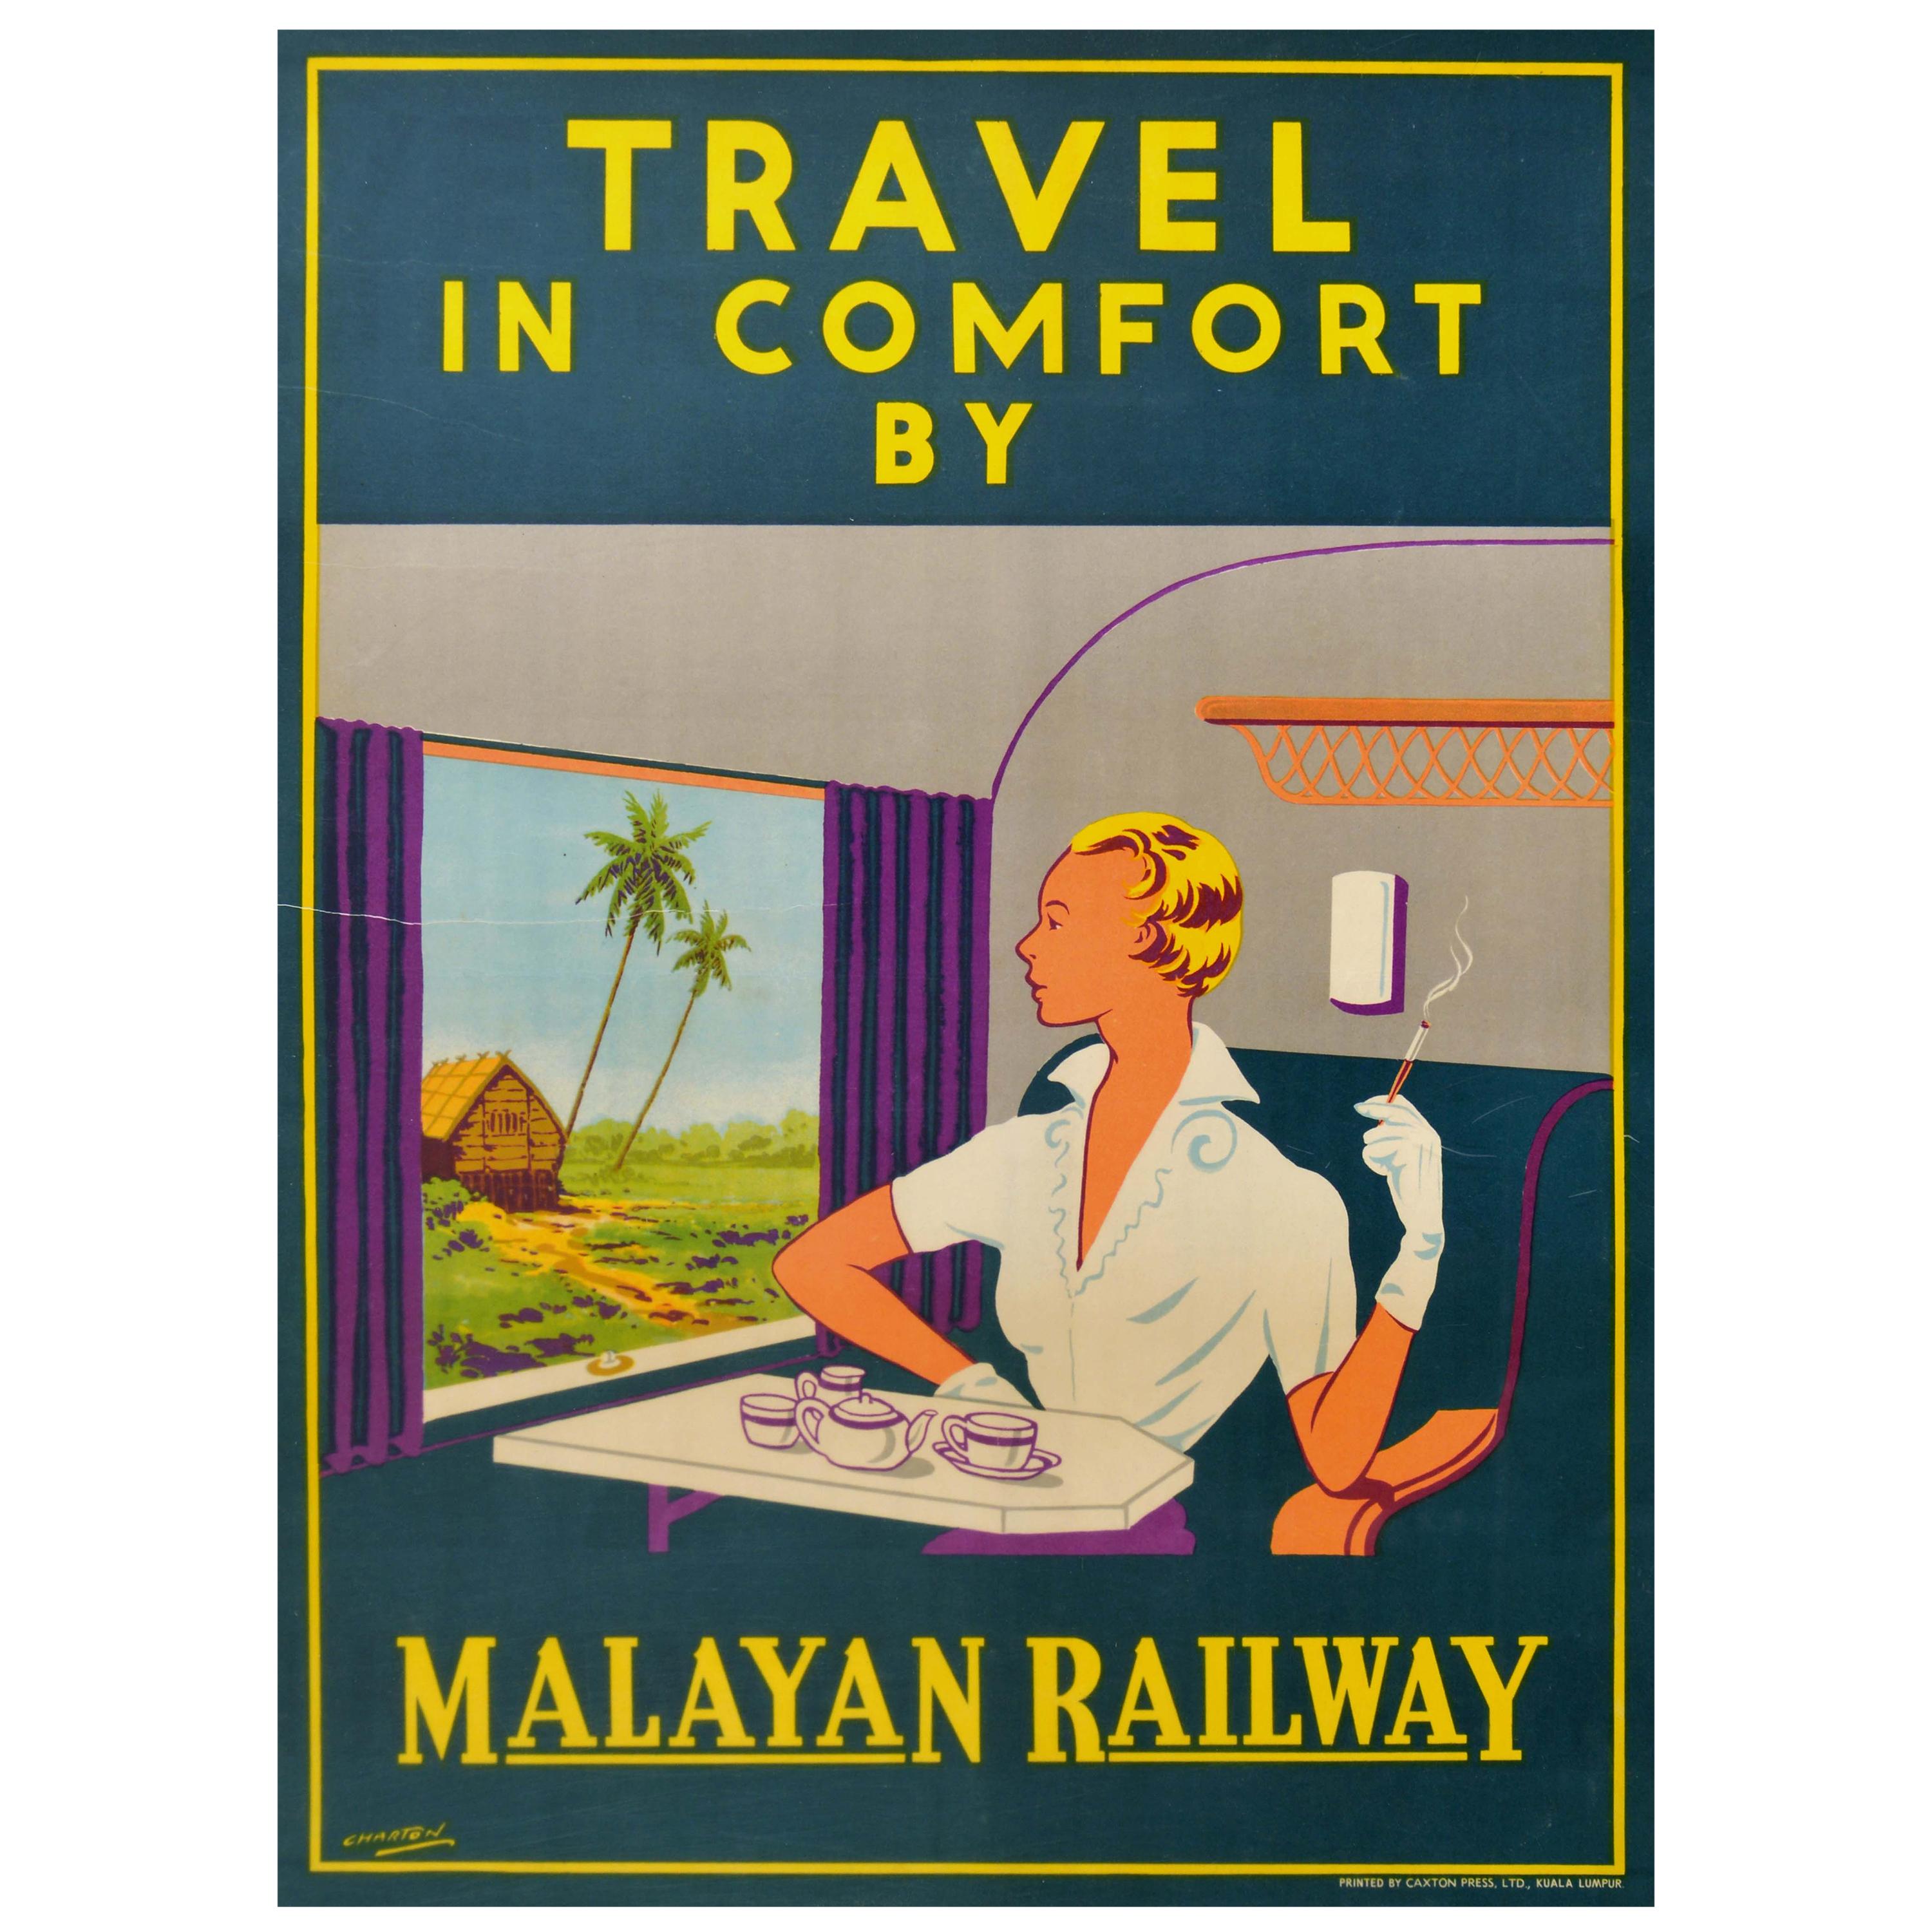 Original Vintage Art Deco Poster Travel In Comfort By Malayan Railway Train Asia